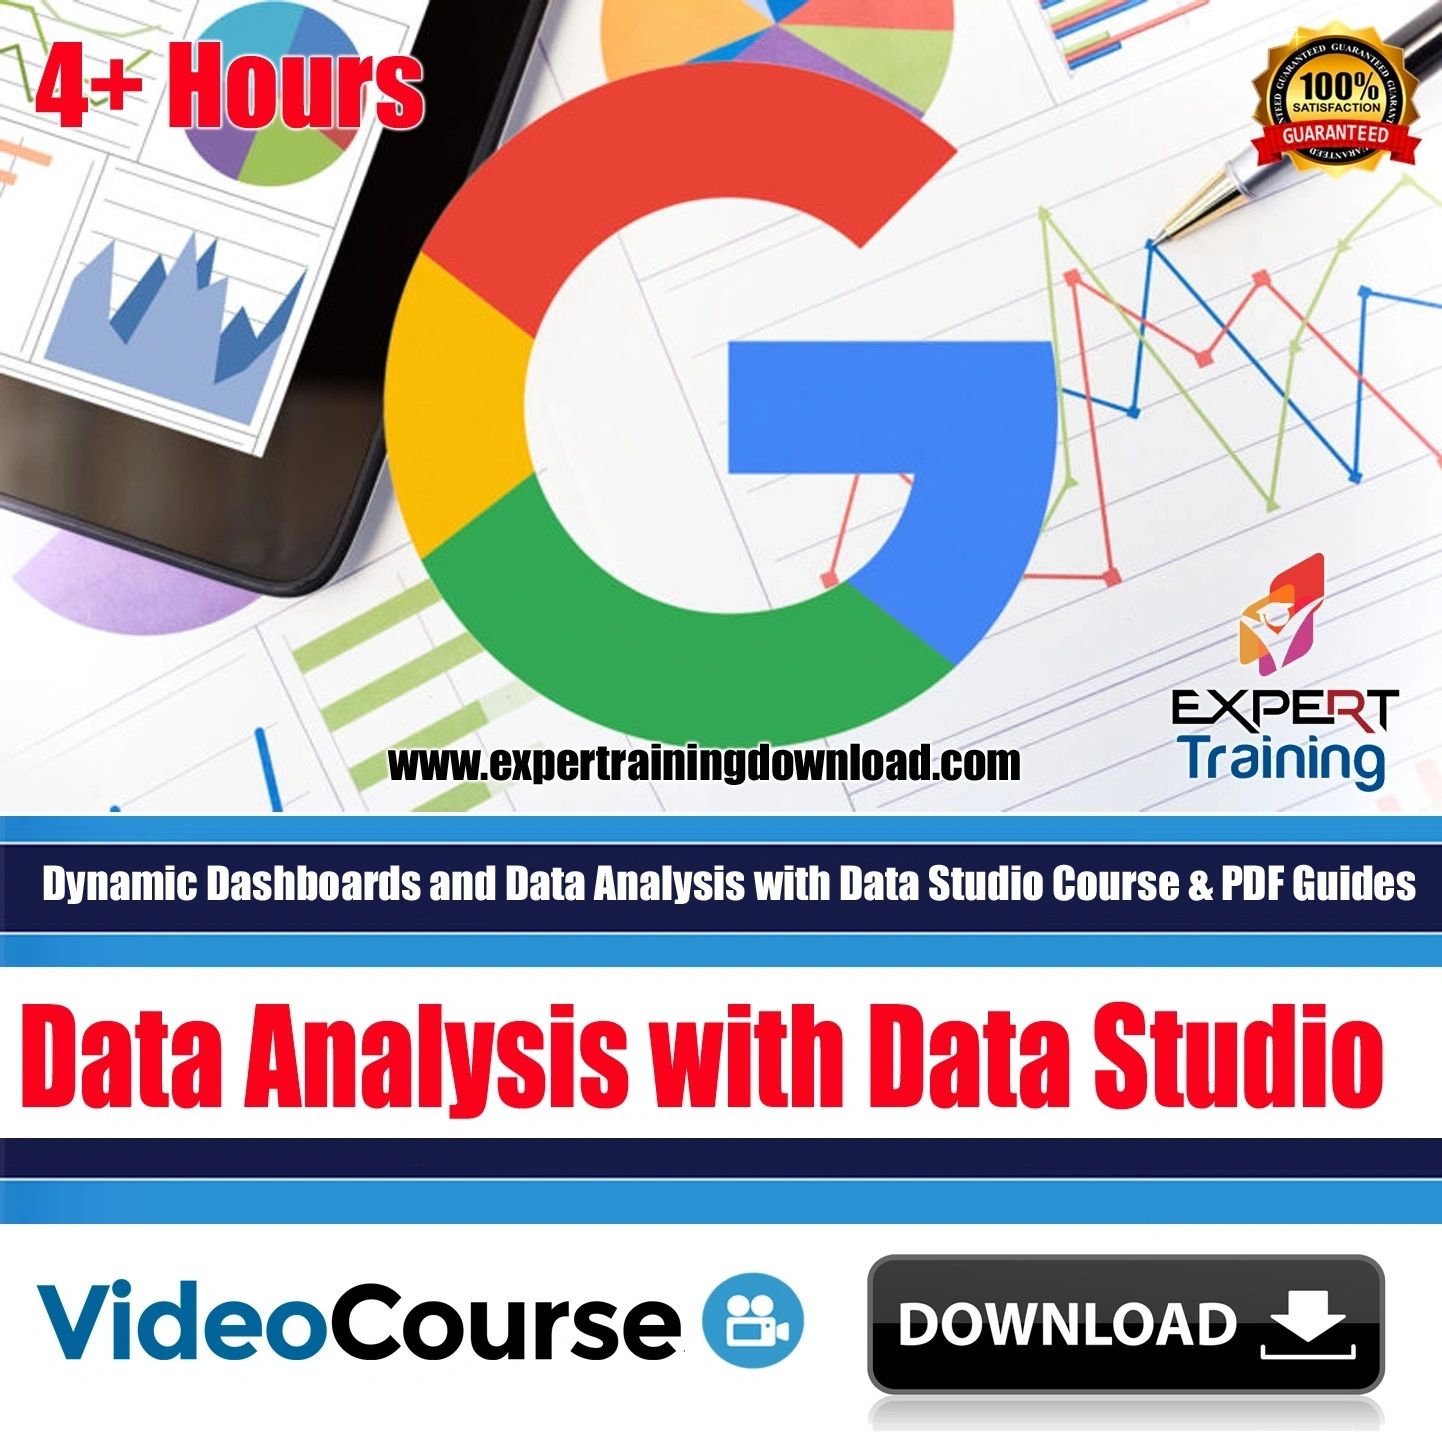 Dynamic Dashboards and Data Analysis with Data Studio Course & PDF Guides